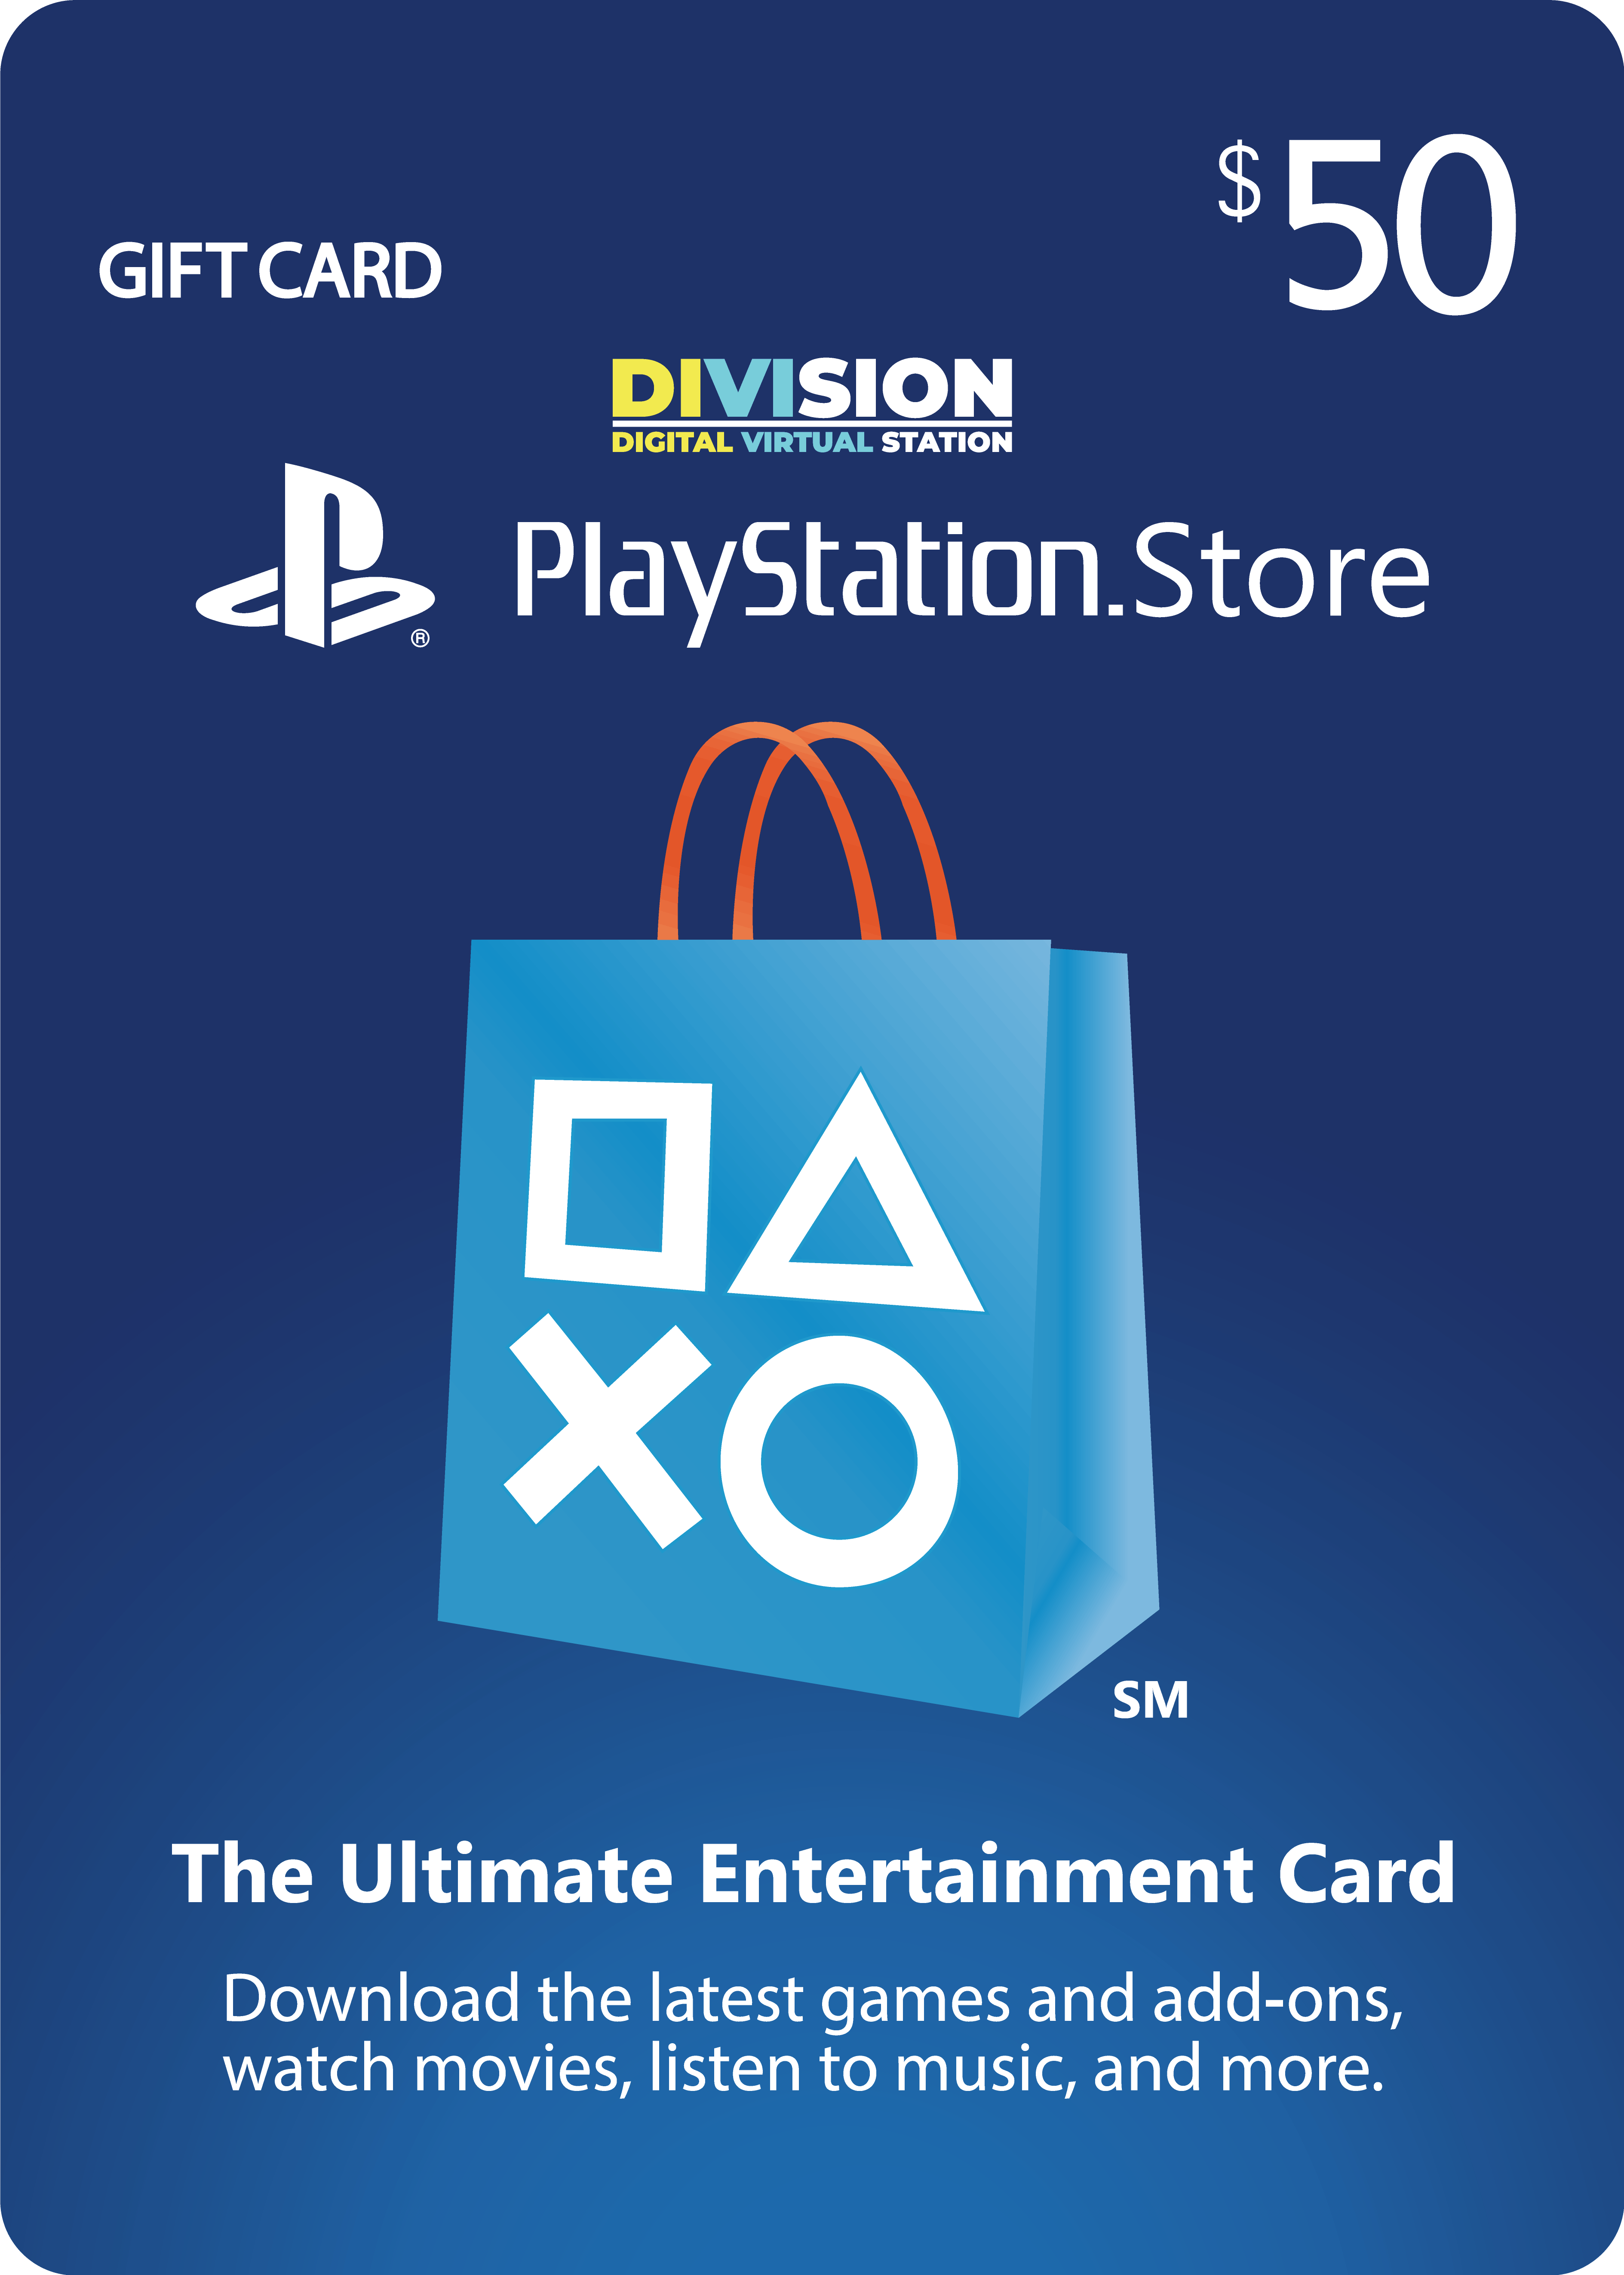 best place to buy us psn cards